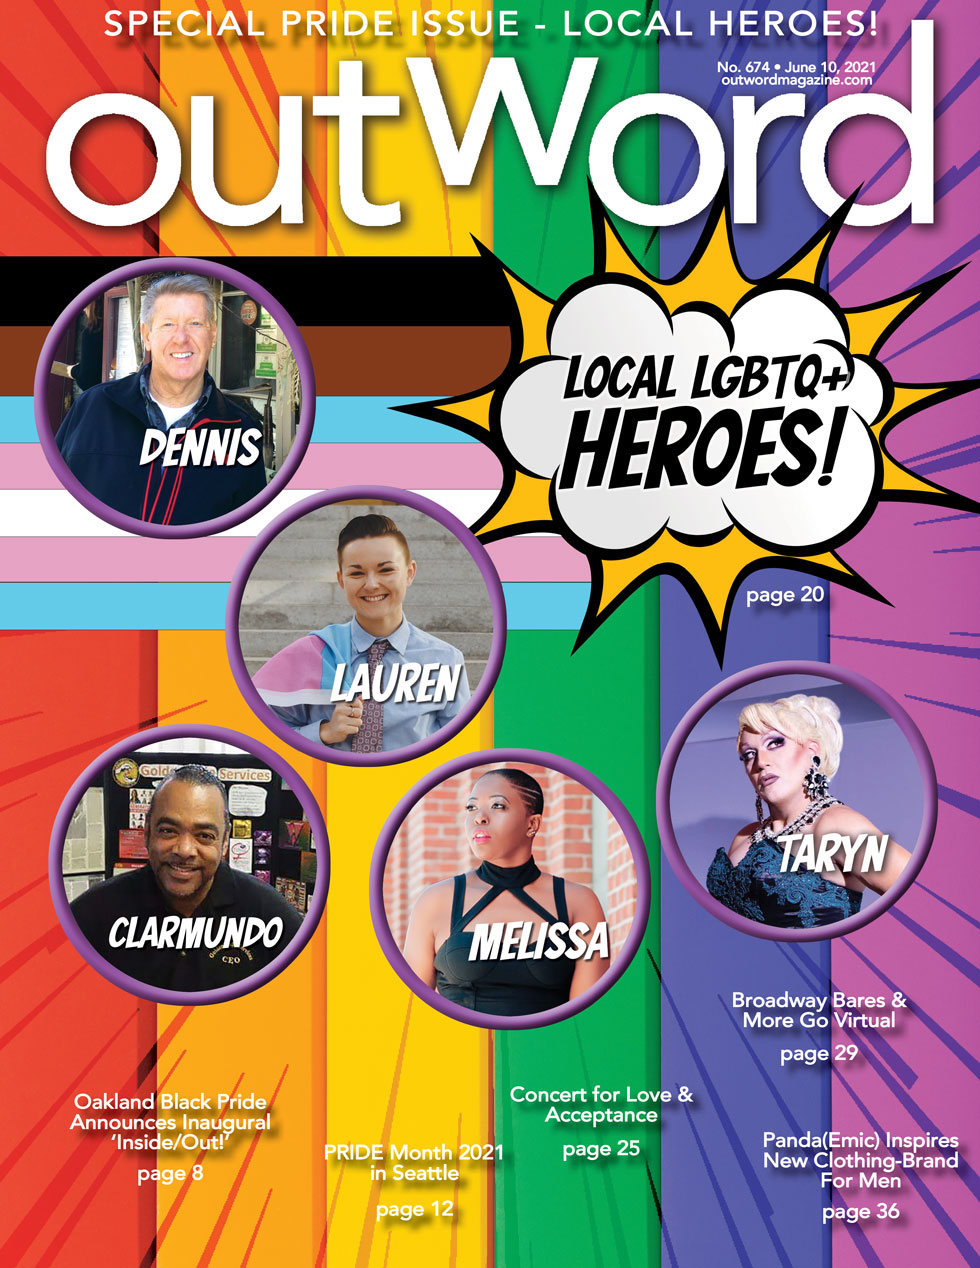 June 10, 2021 | The new issue of Outword, Pride Two, Local LGBTQ+ Heroes is Out Now!